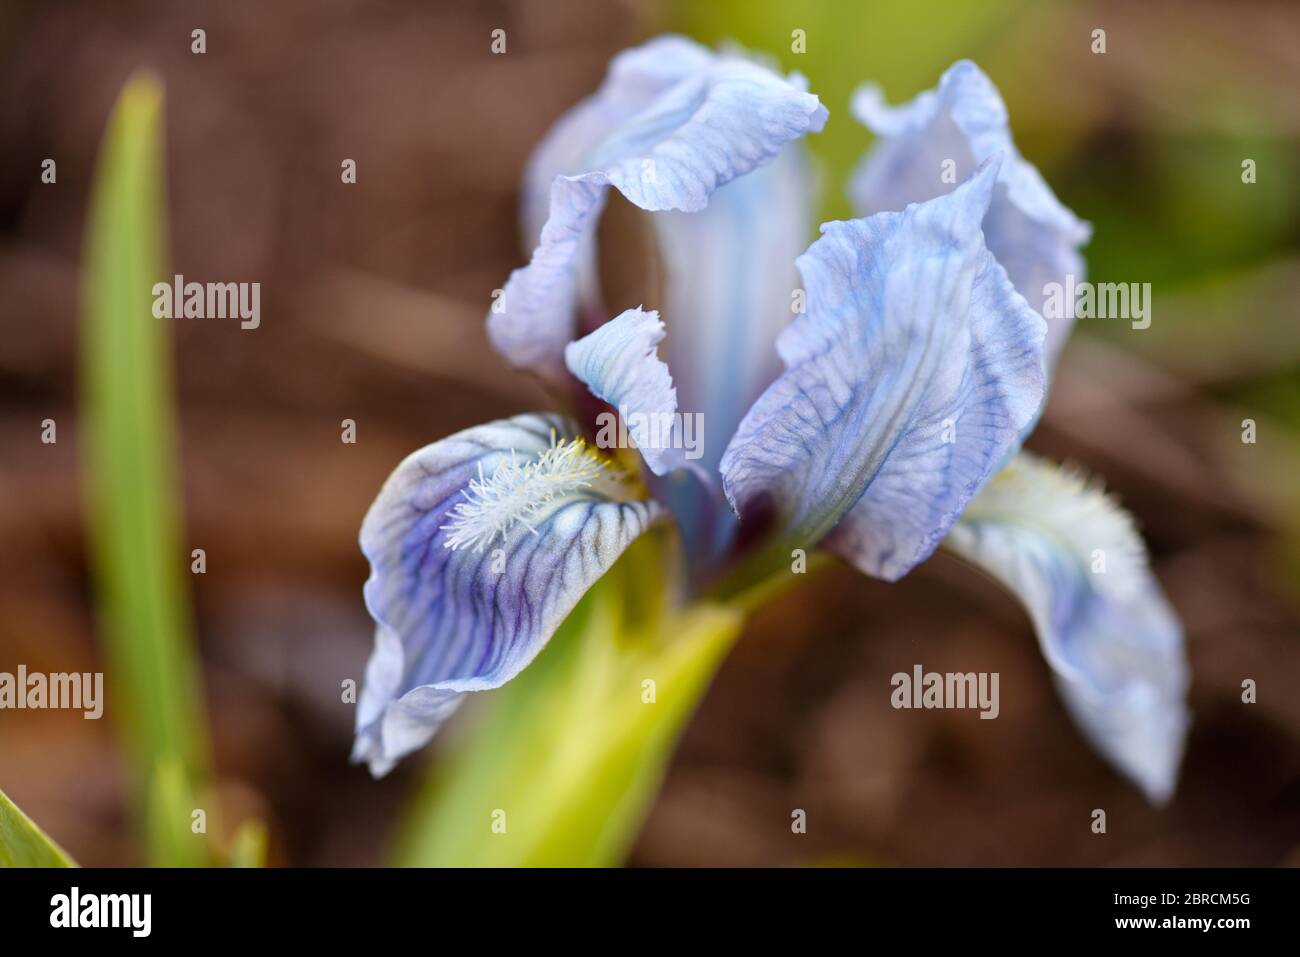 Close-up of a flower of bearded iris on blurred natural background. Blue iris flower are growing in a garden. Stock Photo